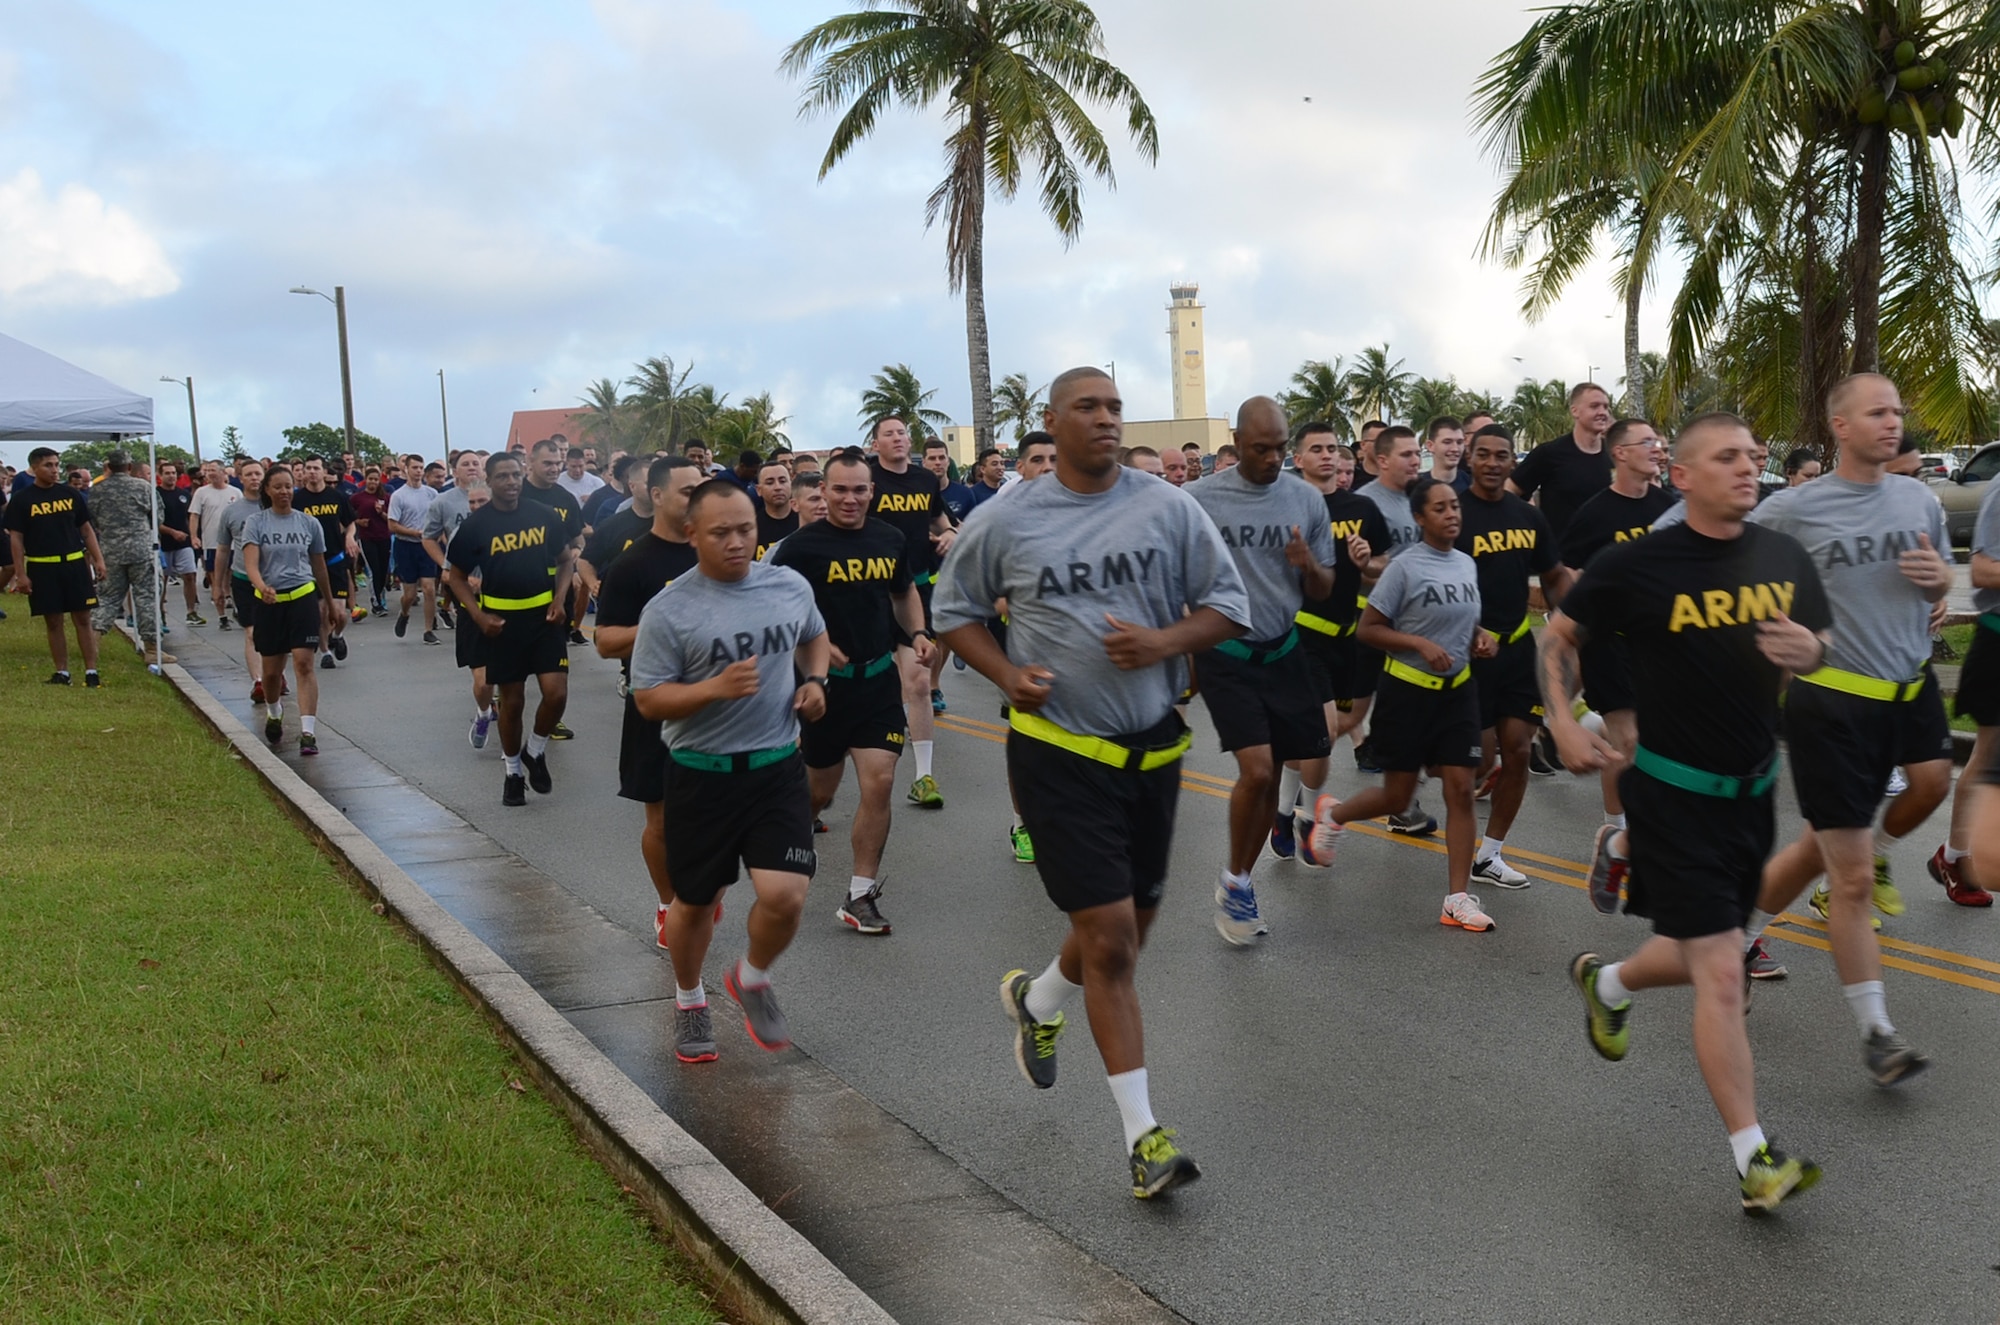 Participants begin the Sexual Assault Awareness Month 5K at Andersen Air Force Base, Guam, April 27, 2015. The Sexual Assault Awareness Month 5K was held by the 94th Army Air and Missile Defense Command Task Force Talon. The 5K brought the sister services together to bring awareness to sexual assault prevention. (U.S. Air Force photo by Airman 1st Class Alexa Ann Henderson/Released)